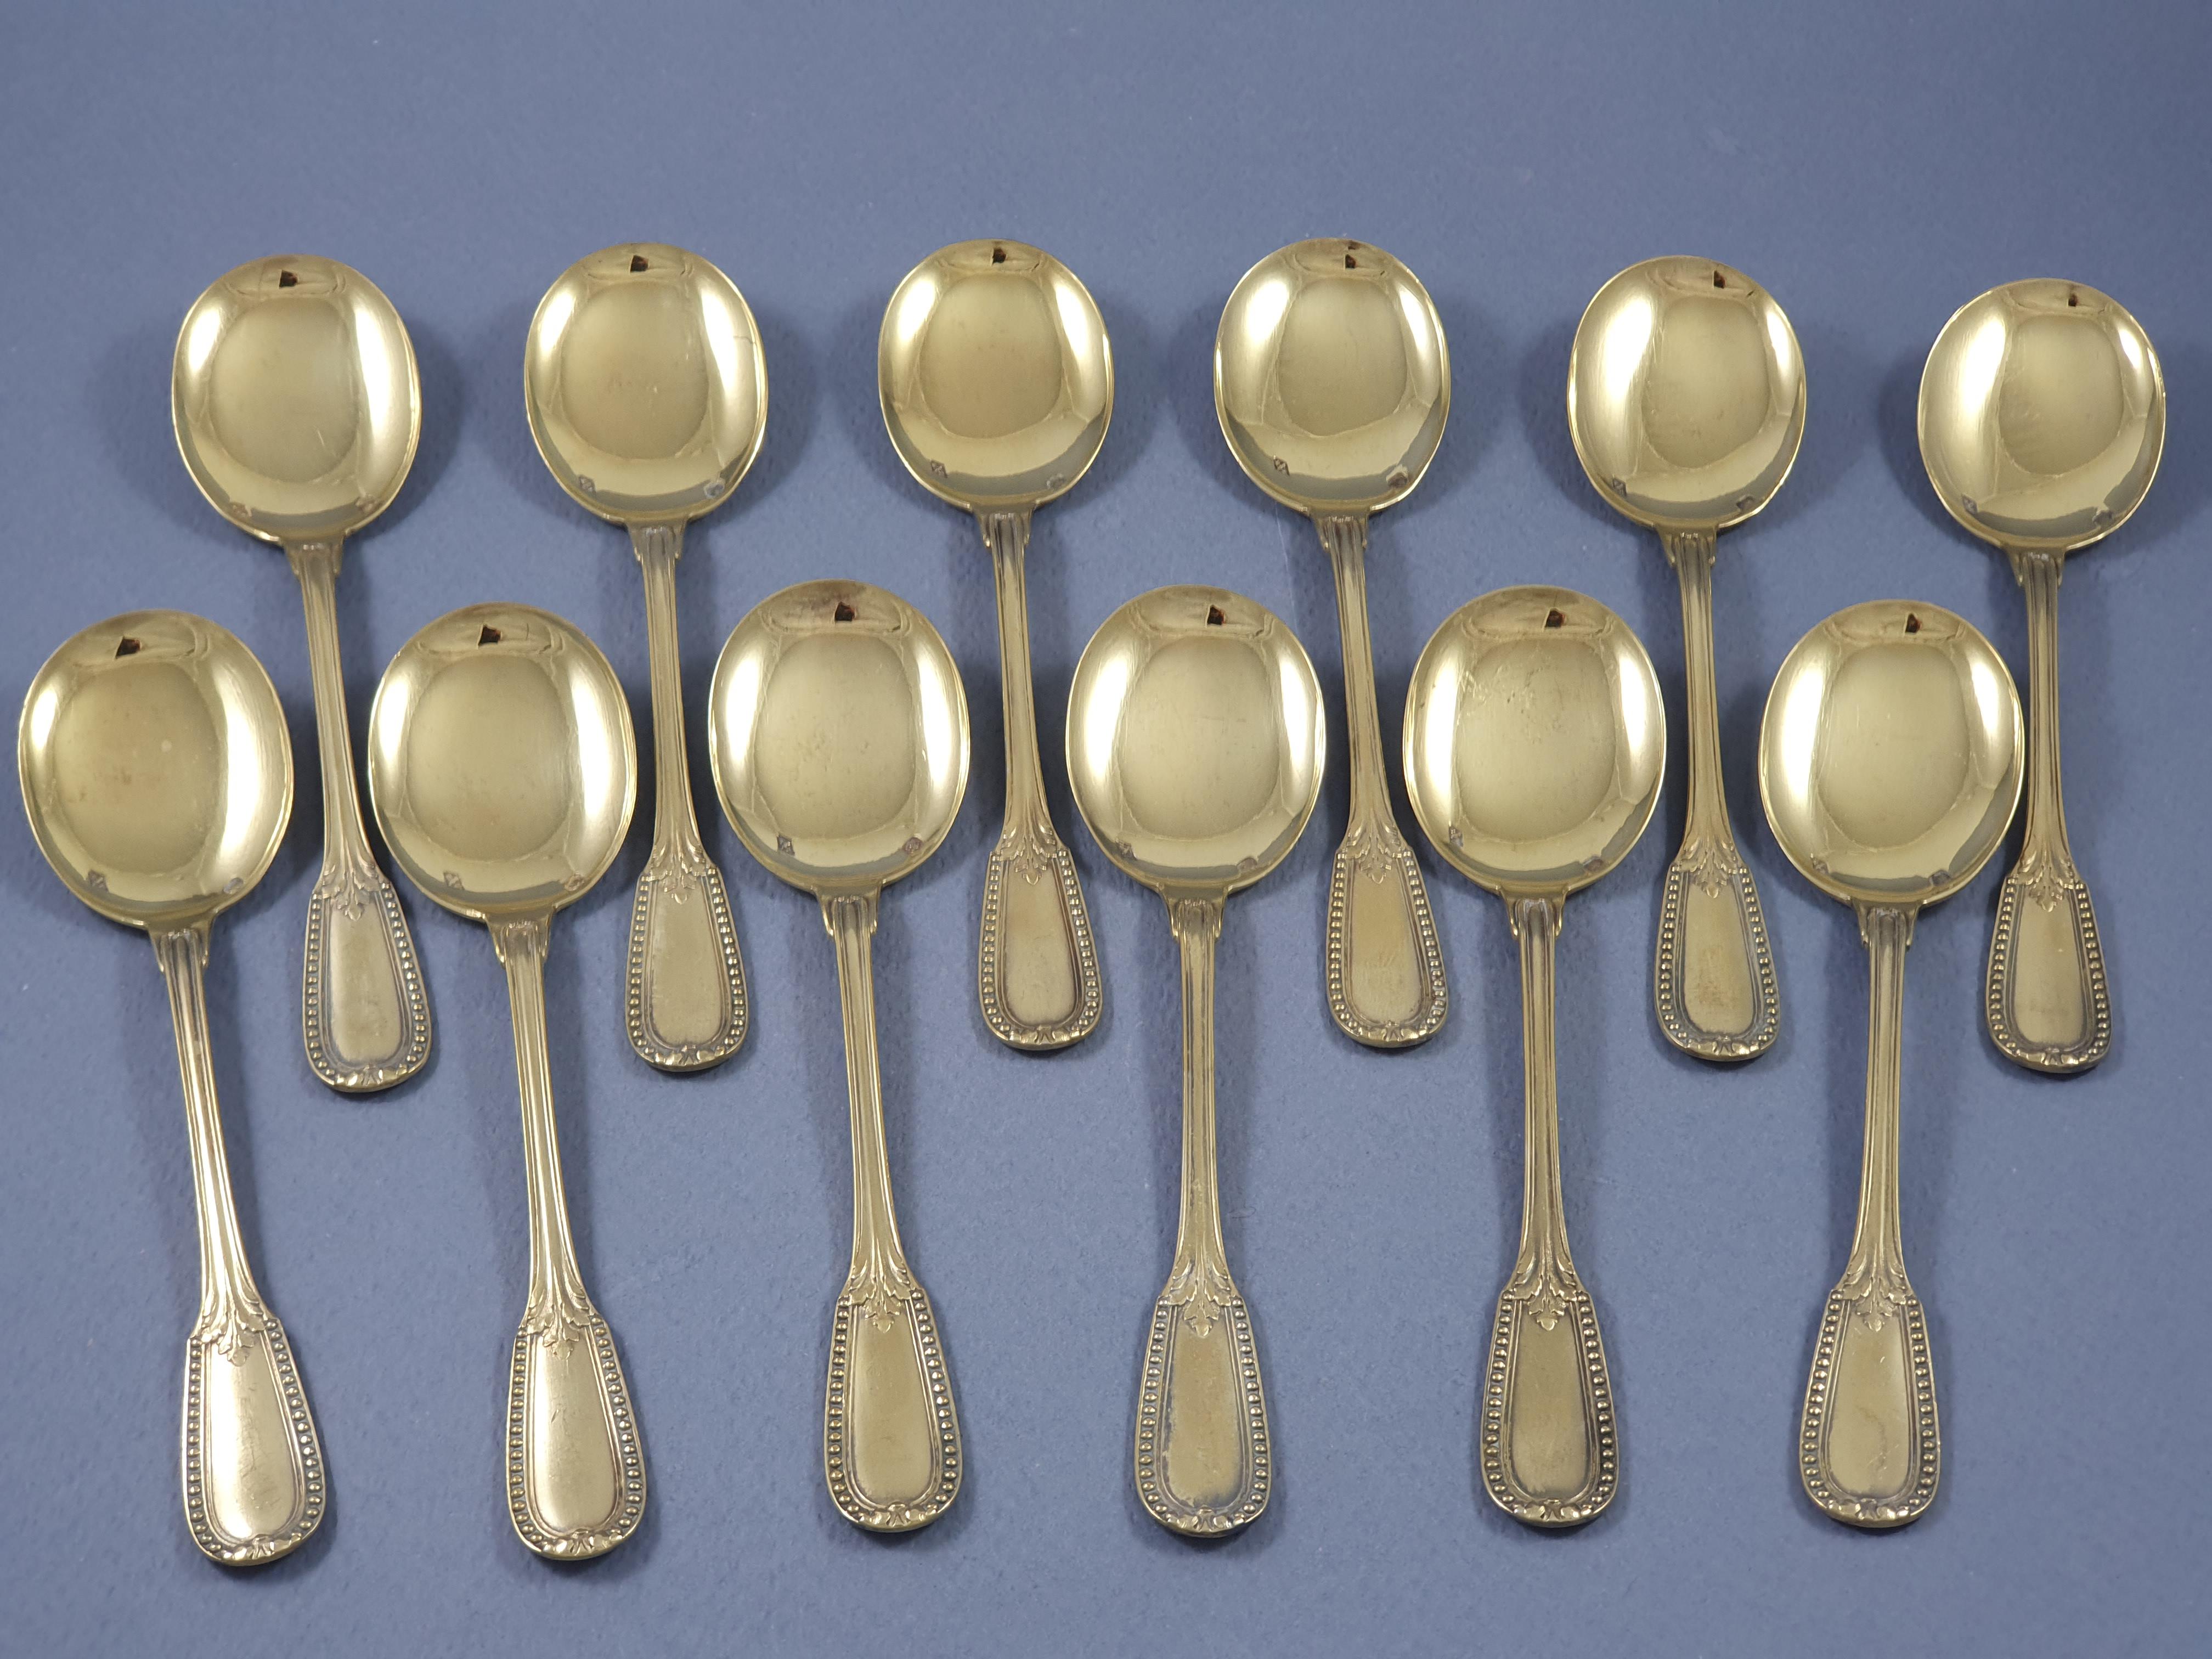 12 Sterling Silver Gilt Ice Cream Spoons

Decorated with friezes of pearls and foliage 

Hallmarked Minerva 1st title for 950/1000 Purity Silver 
Silversmith: Puiforcat 

Length: 12.7 cm 
Weight: 262 grams

Great condition